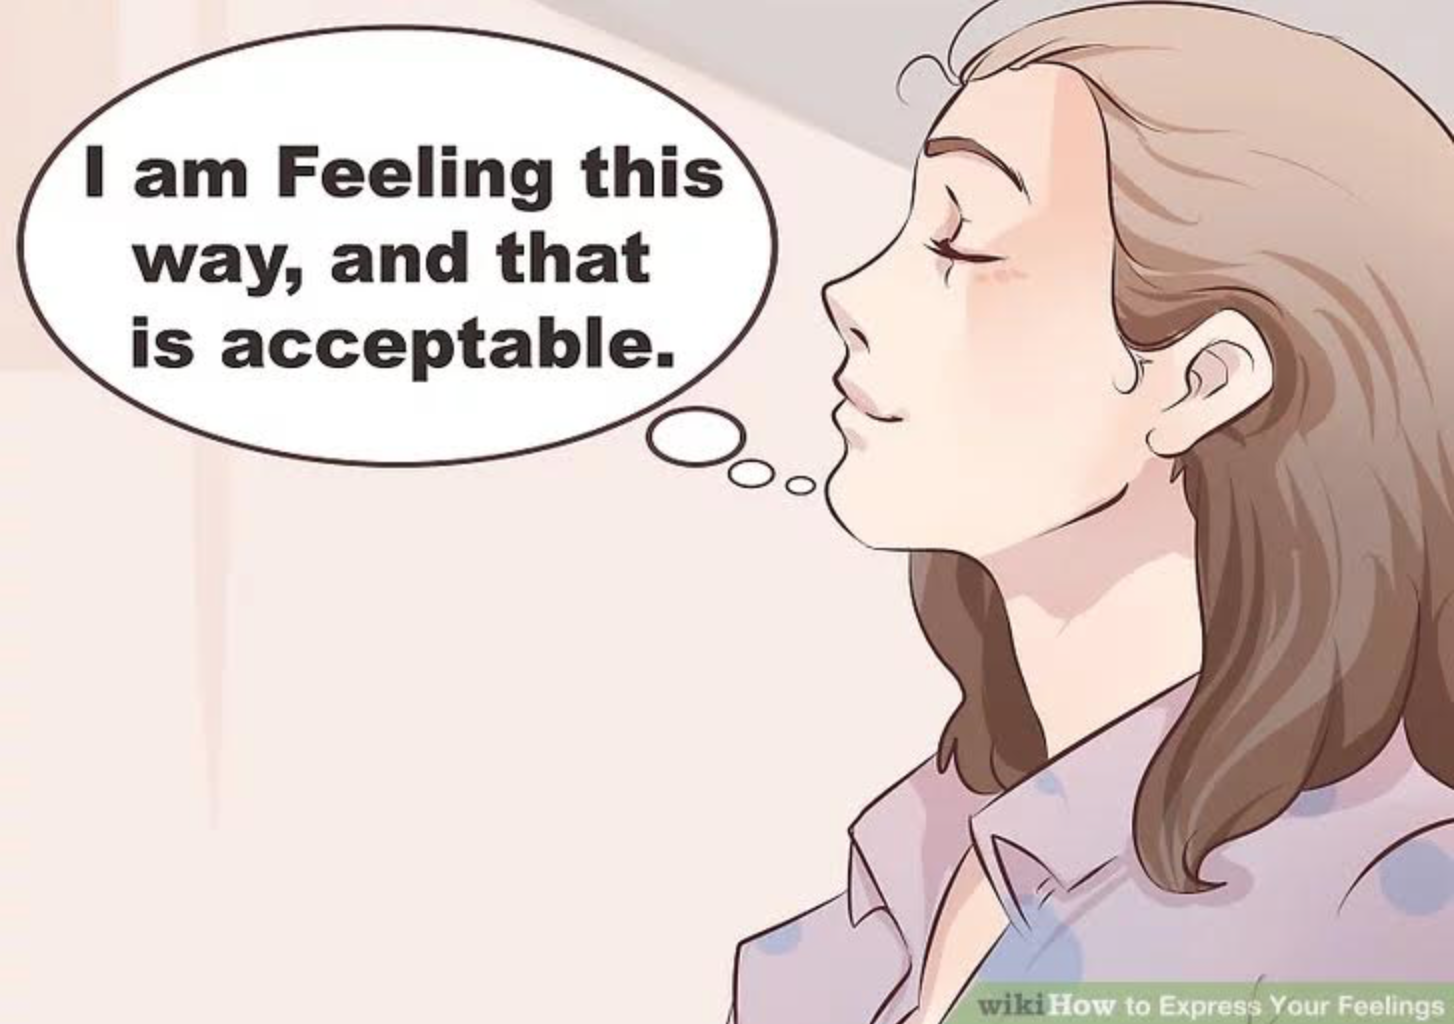 Your feelings. Express your feelings. Feelings accept. How to Express feelings.